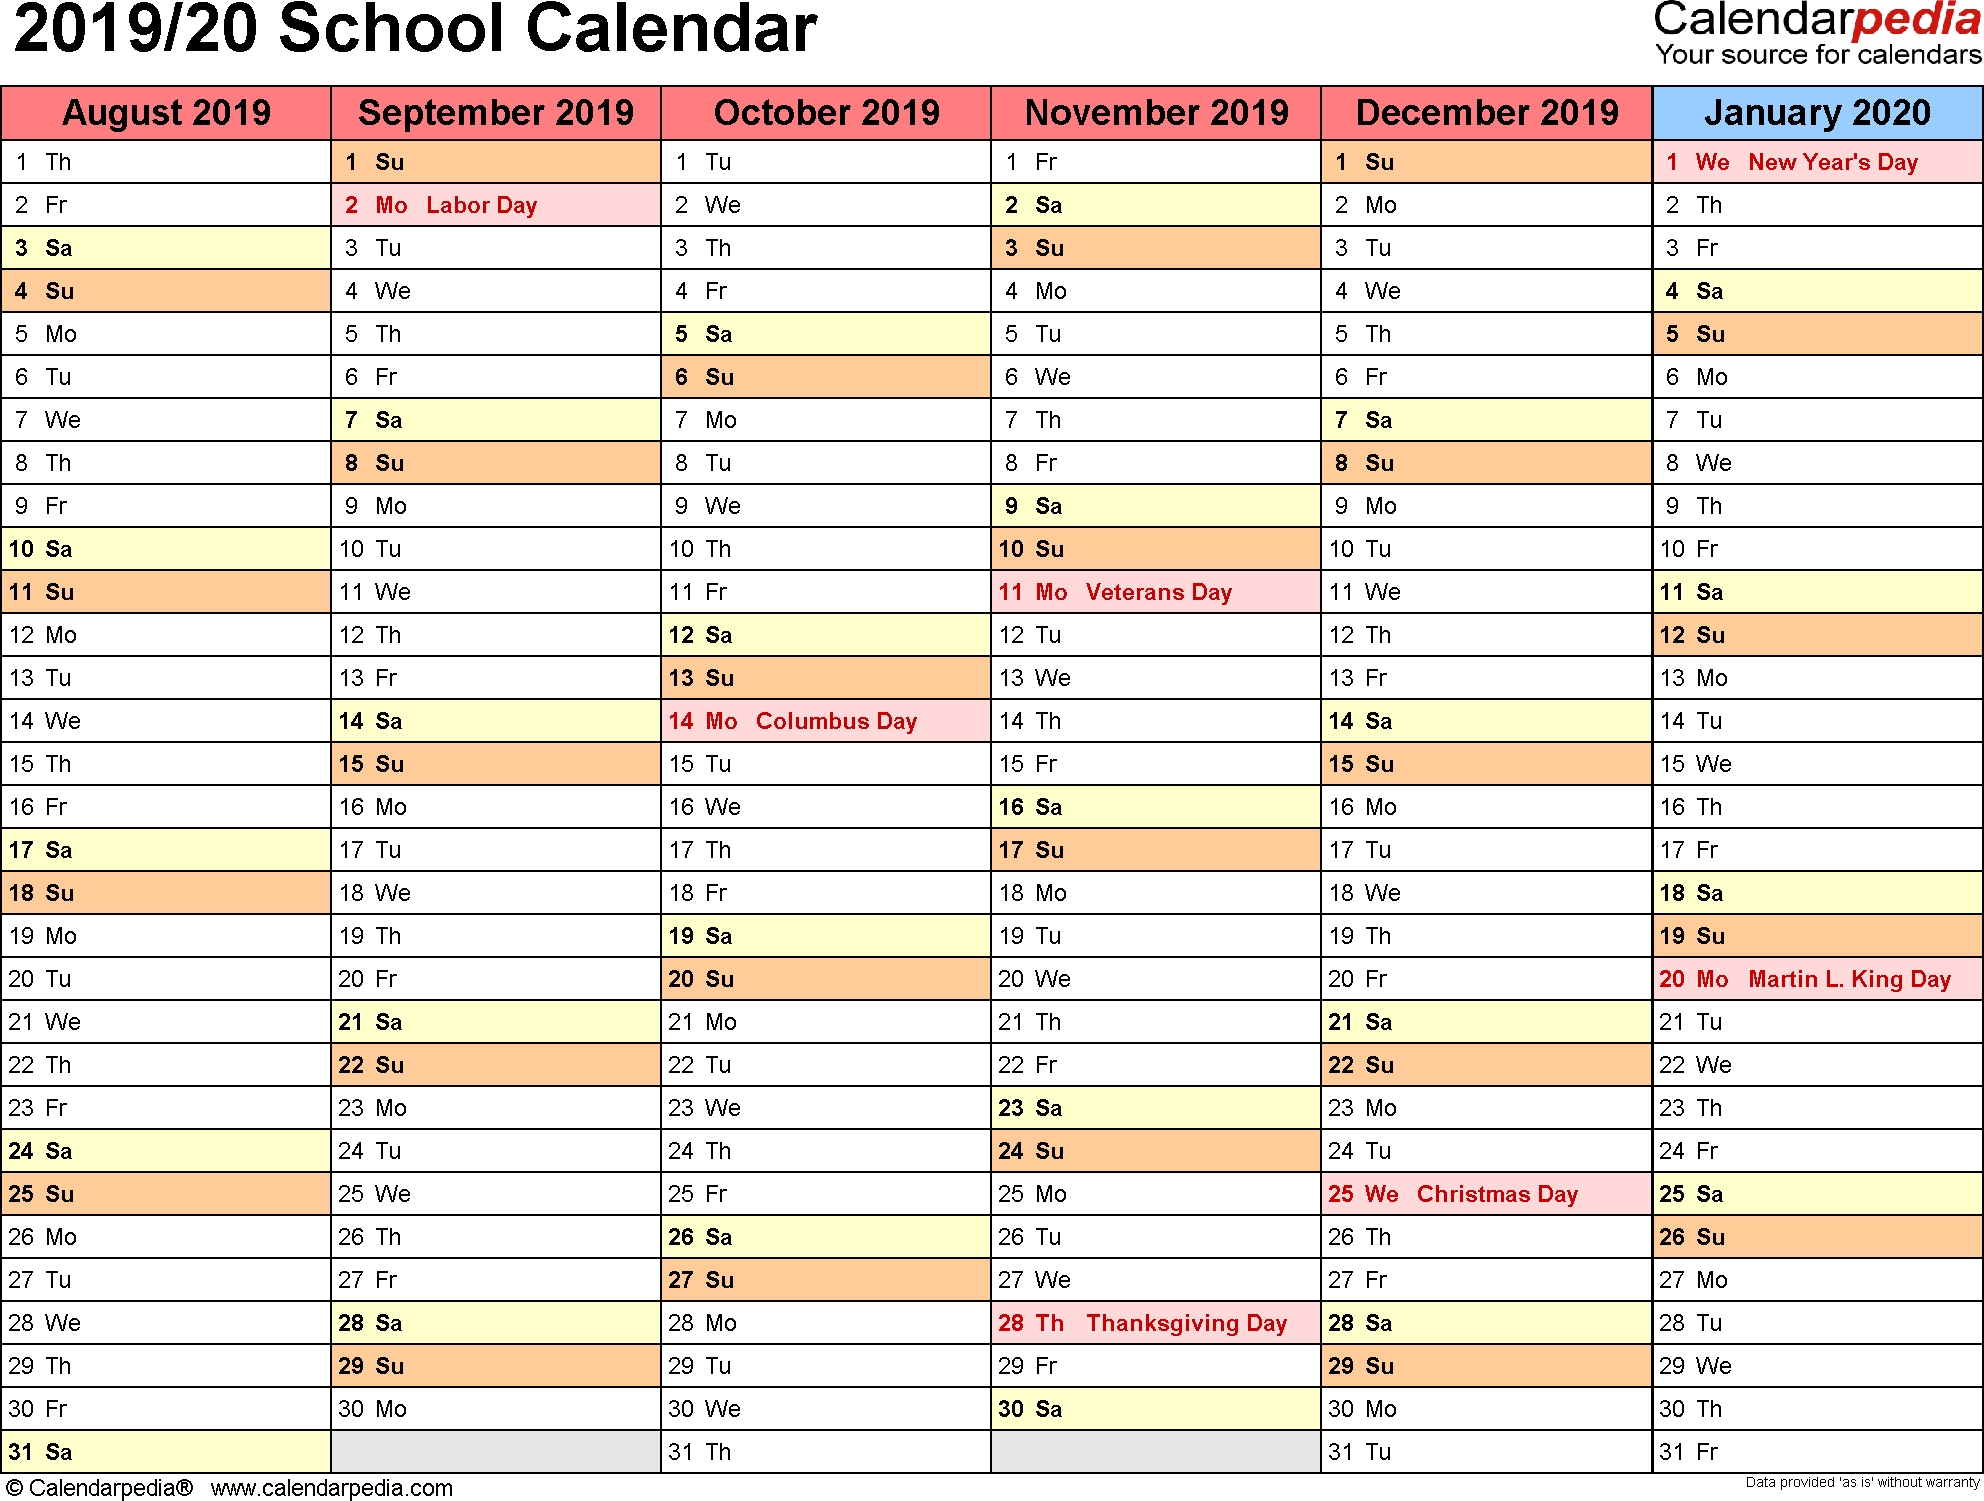 School Calendars 2019/2020 As Free Printable Excel Templates with Special Days Calendar 2019-2020